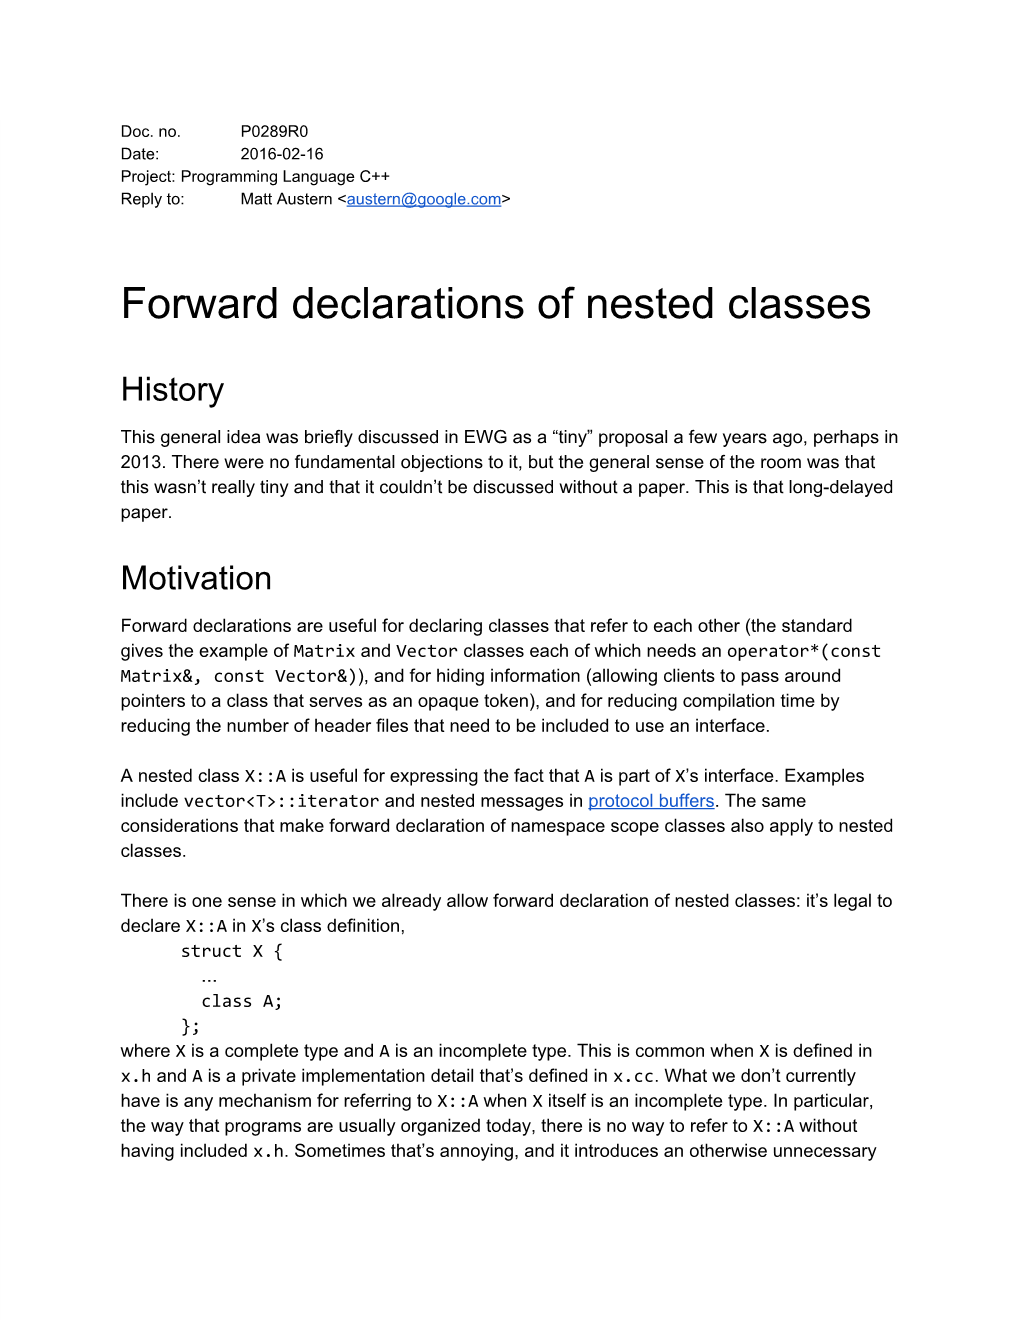 Forward Declarations of Nested Classes